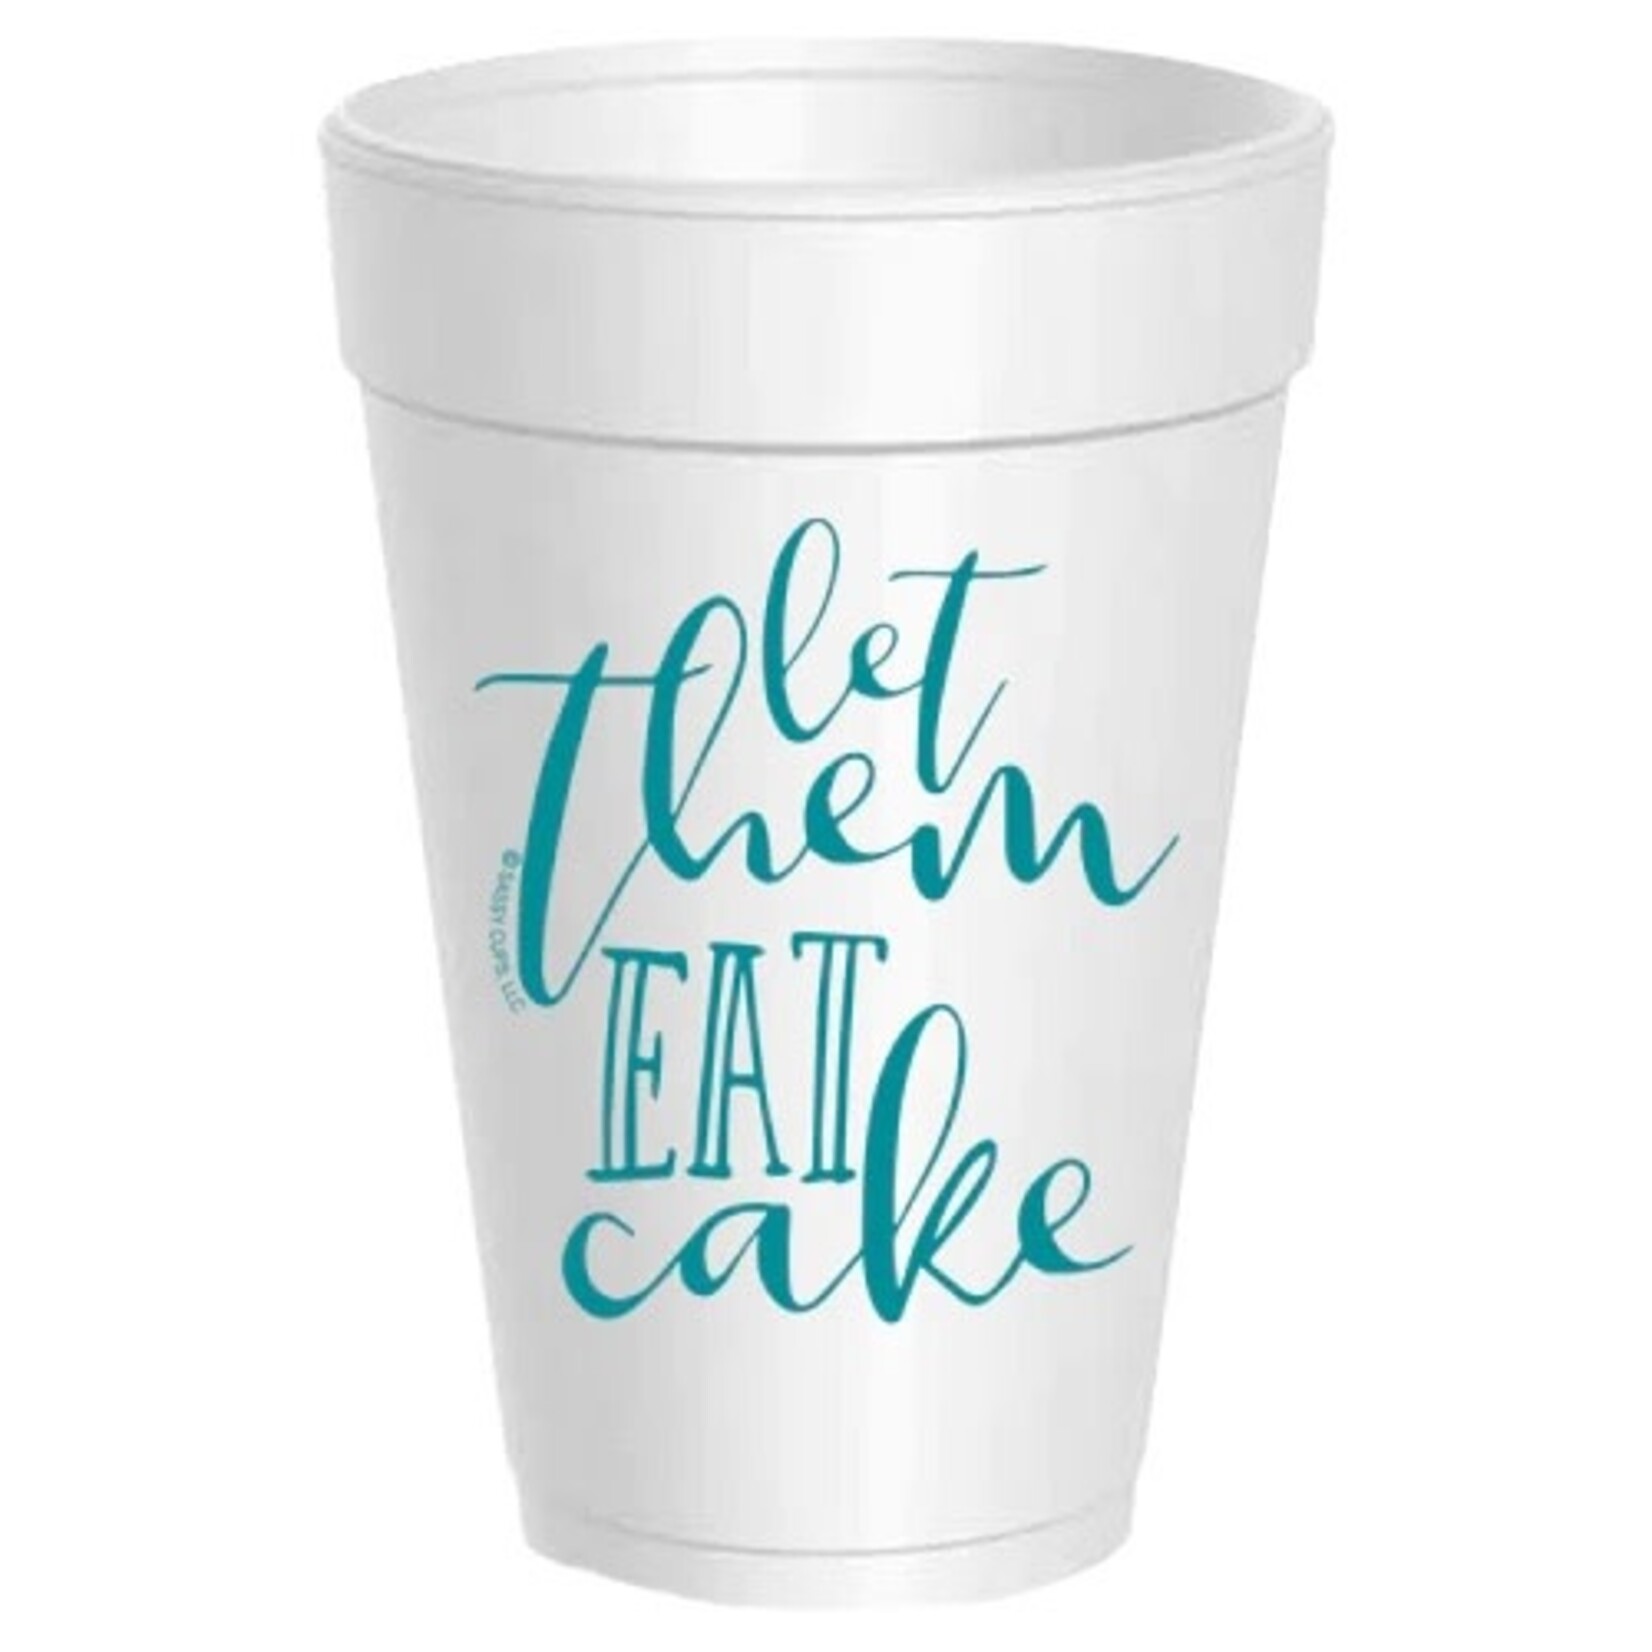 Let them Eat Cake! -GOLD - Pack of 10 Cups